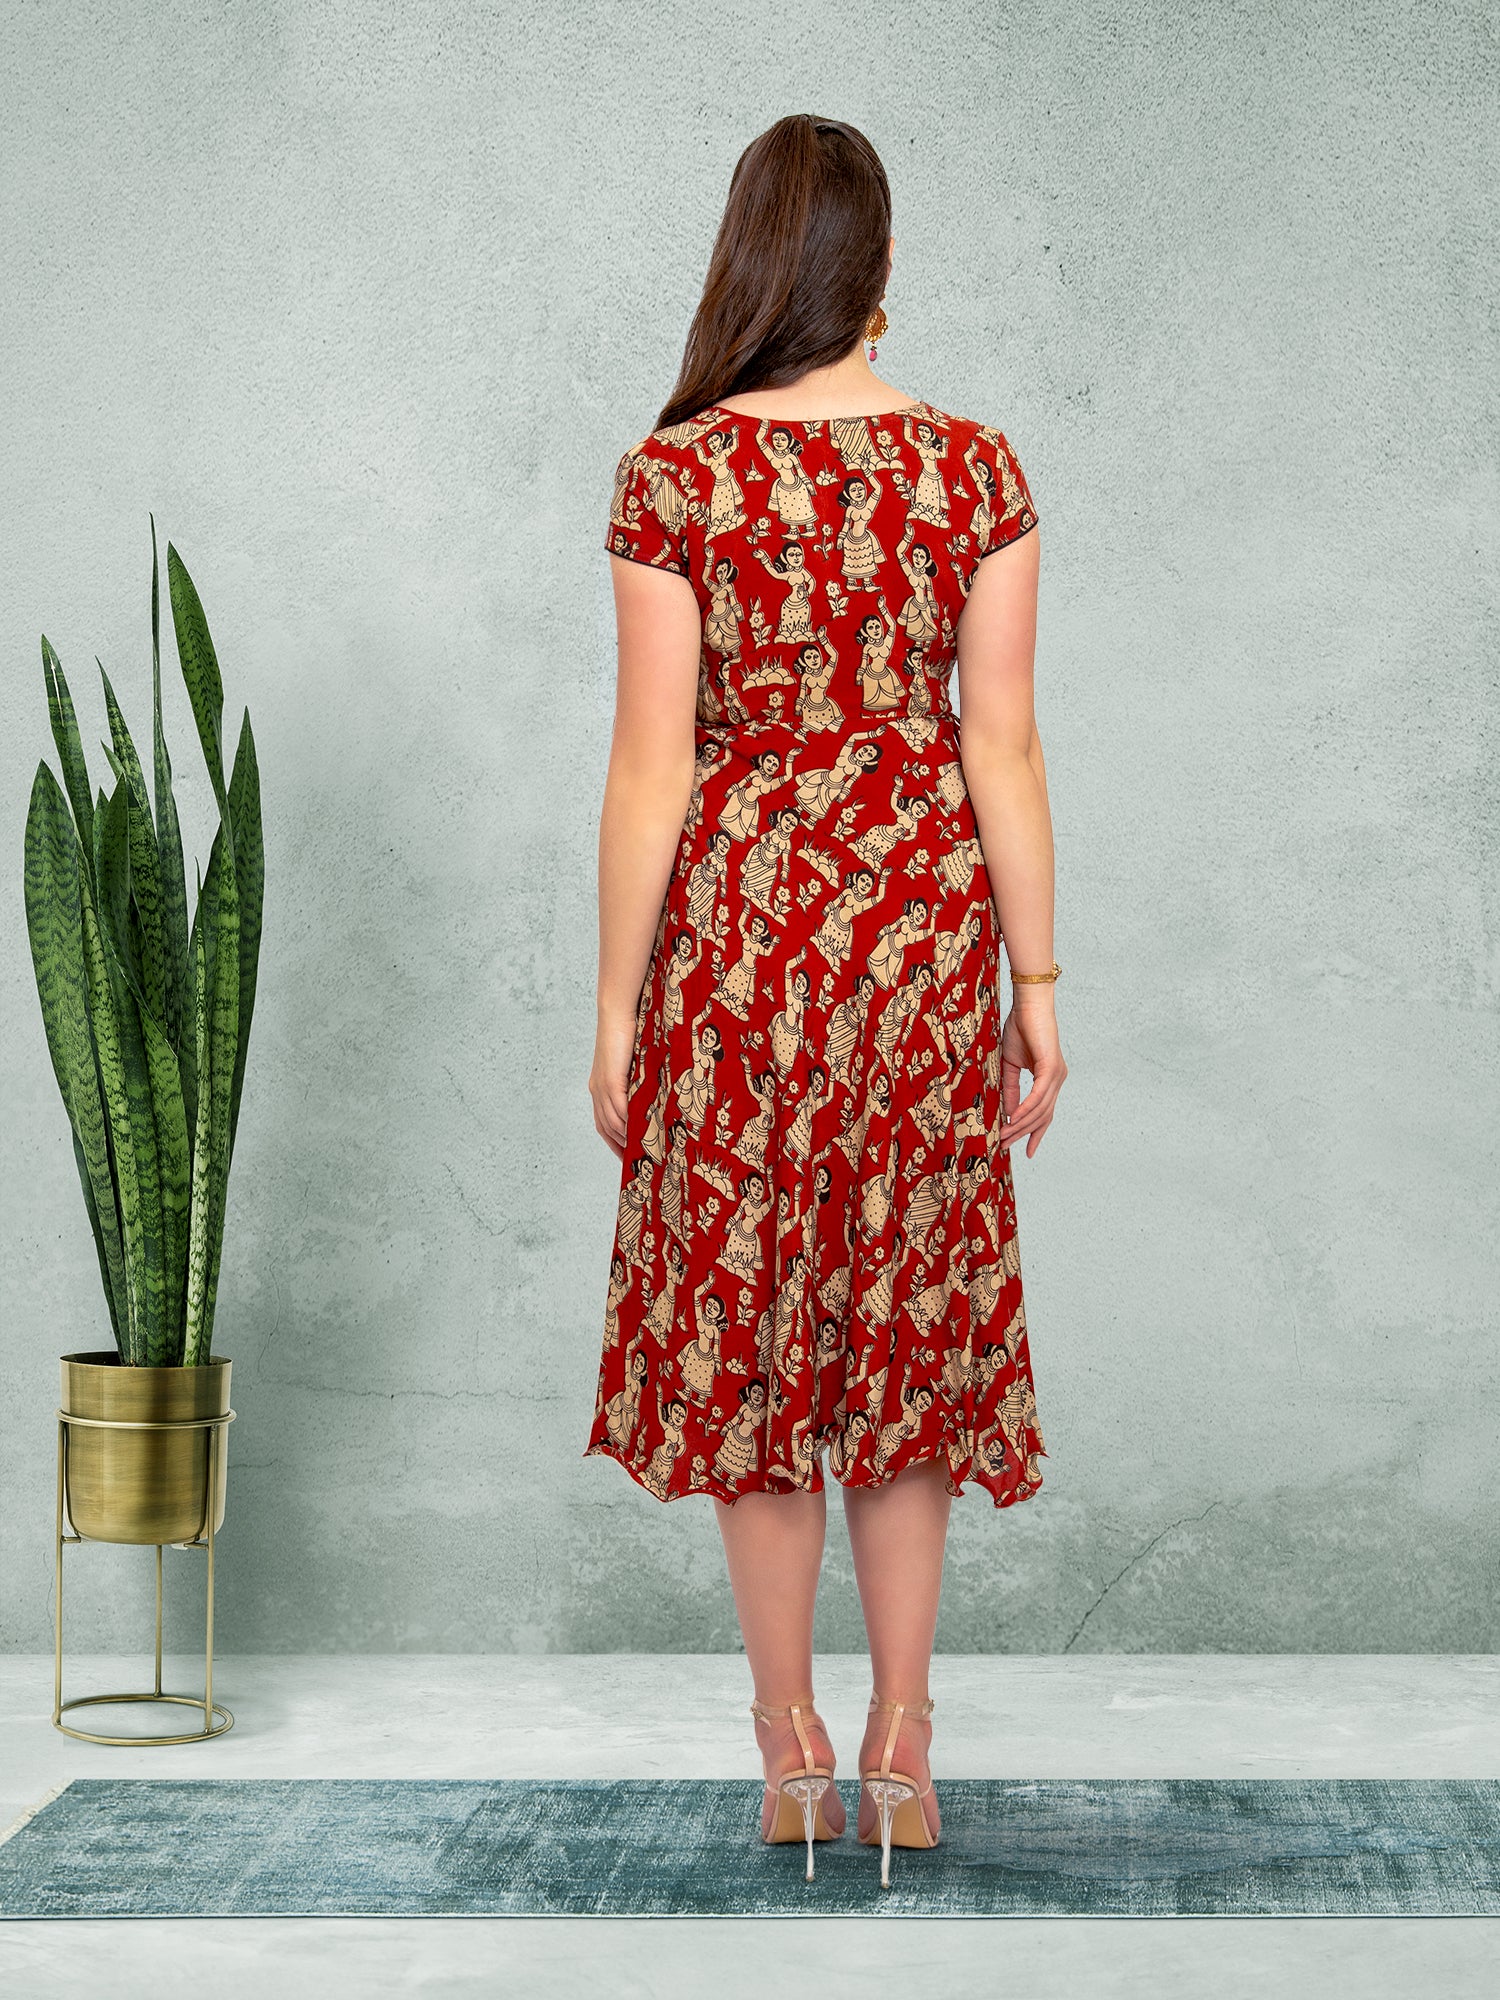 Tranquil Threads - Red Knee Length Dress